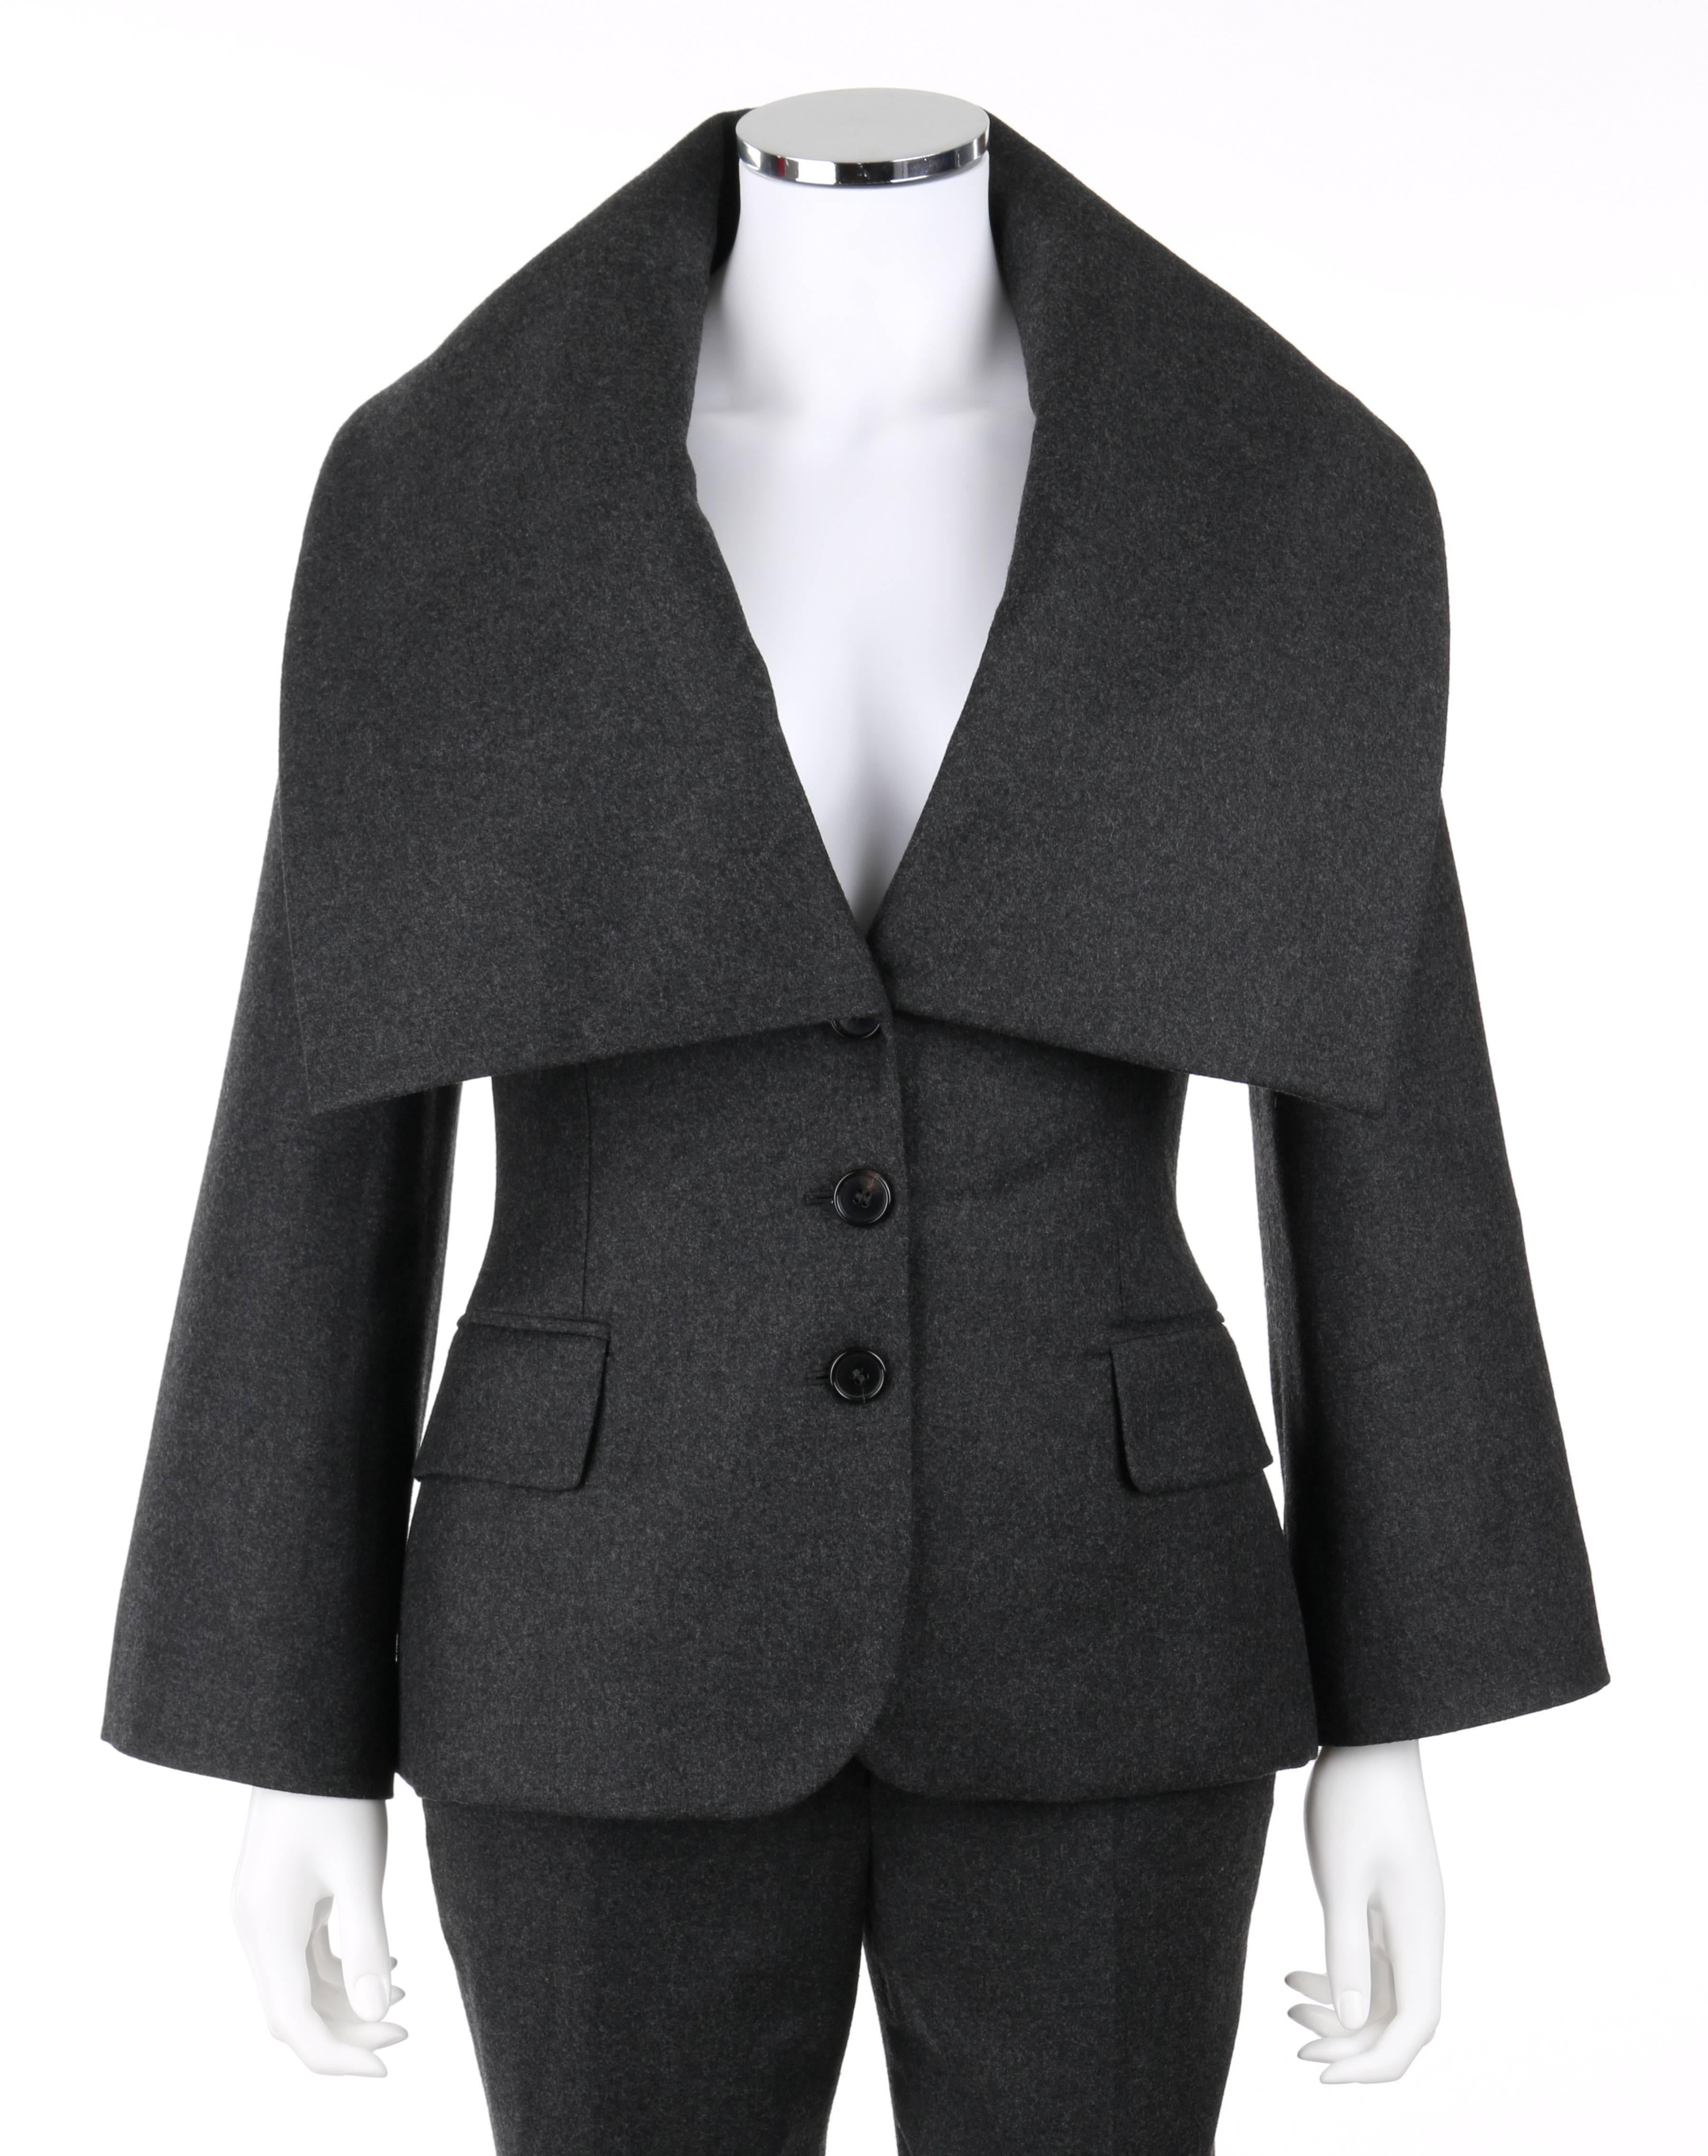 Alexander McQueen Pre-Fall 2009 two piece gray wool cashmere pant suit. Long bell sleeve blazer. Over-sized collar. Three center front button closures. Two front welt flap pockets. Single center back vent. Fully lined. Matching slim fit trousers.